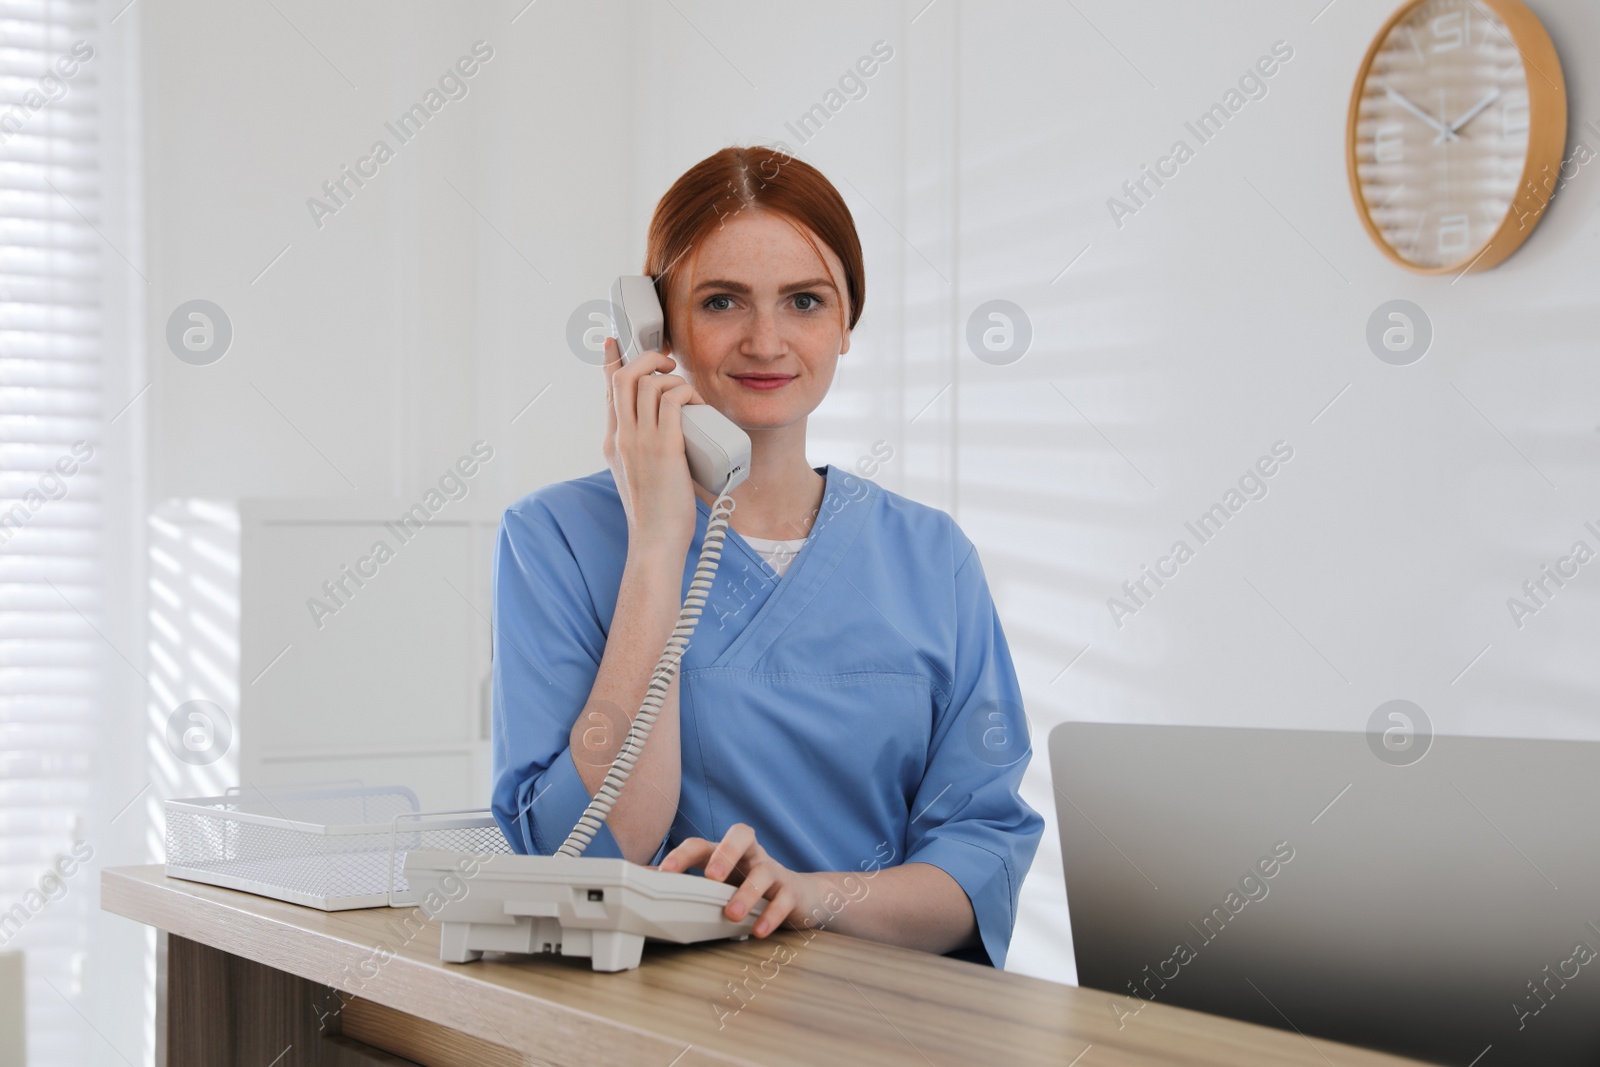 Photo of Receptionist talking on phone at countertop in hospital